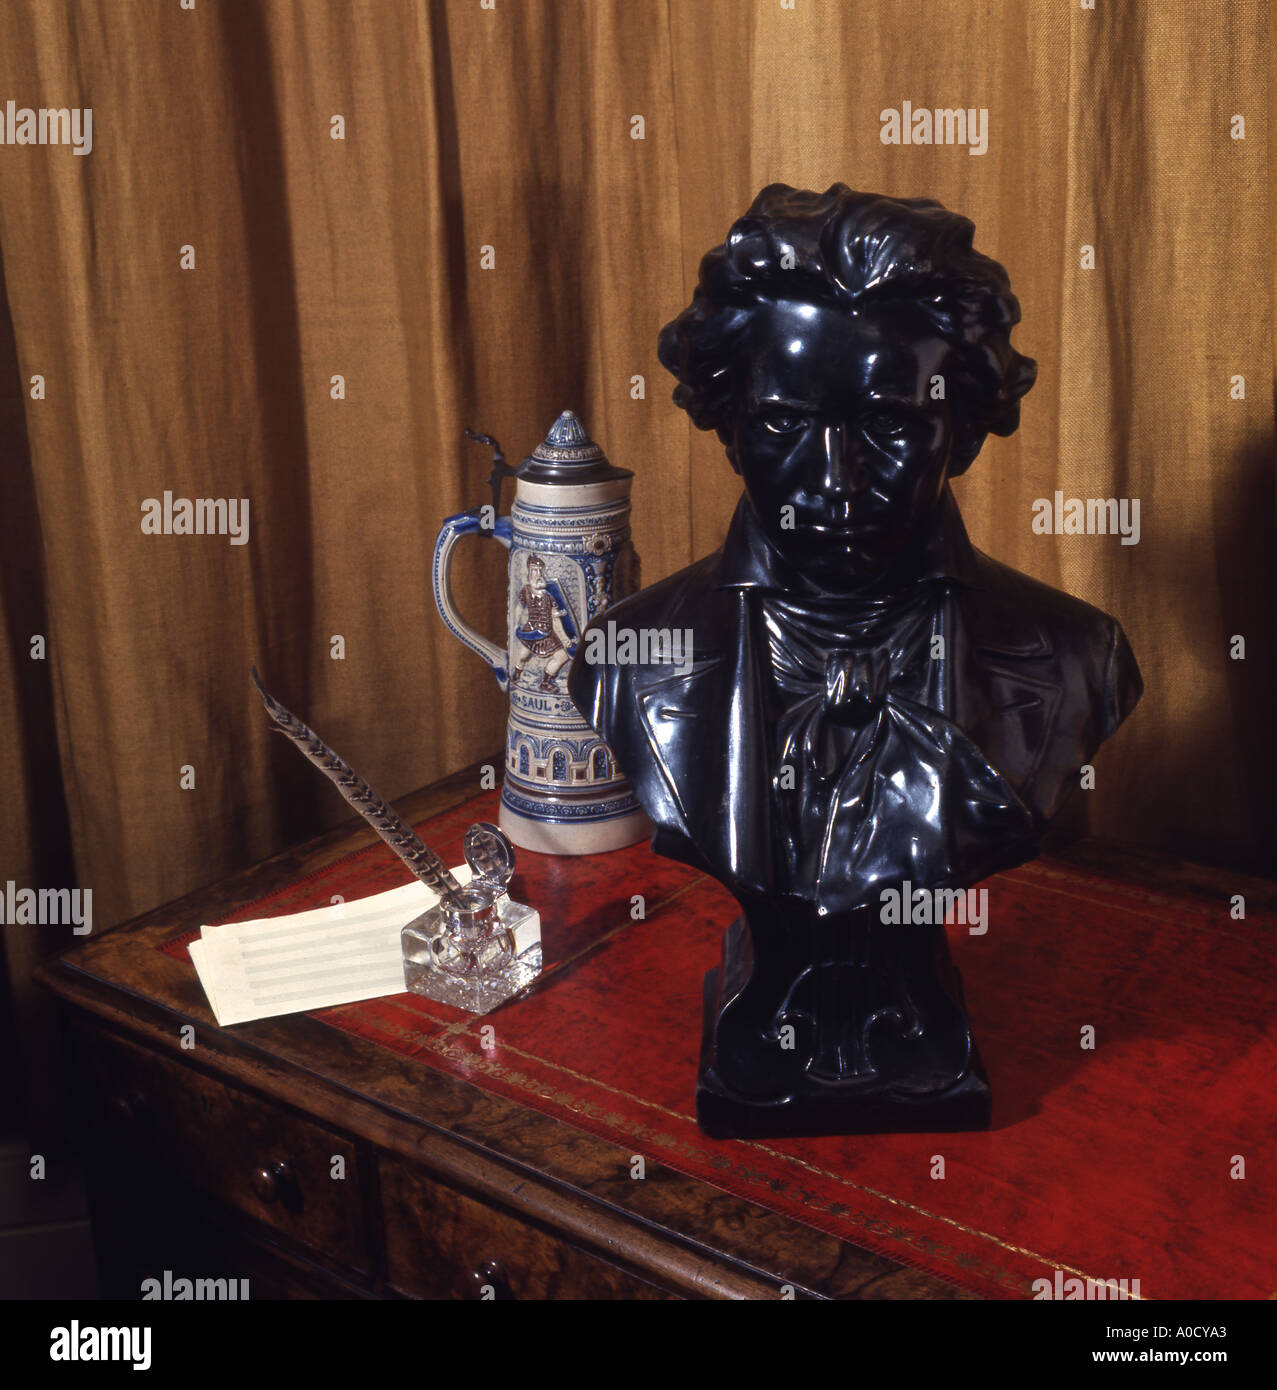 Bust of Beethoven with Tankard Quill Pen and Inkpot on Red Leather Desktop Stock Photo